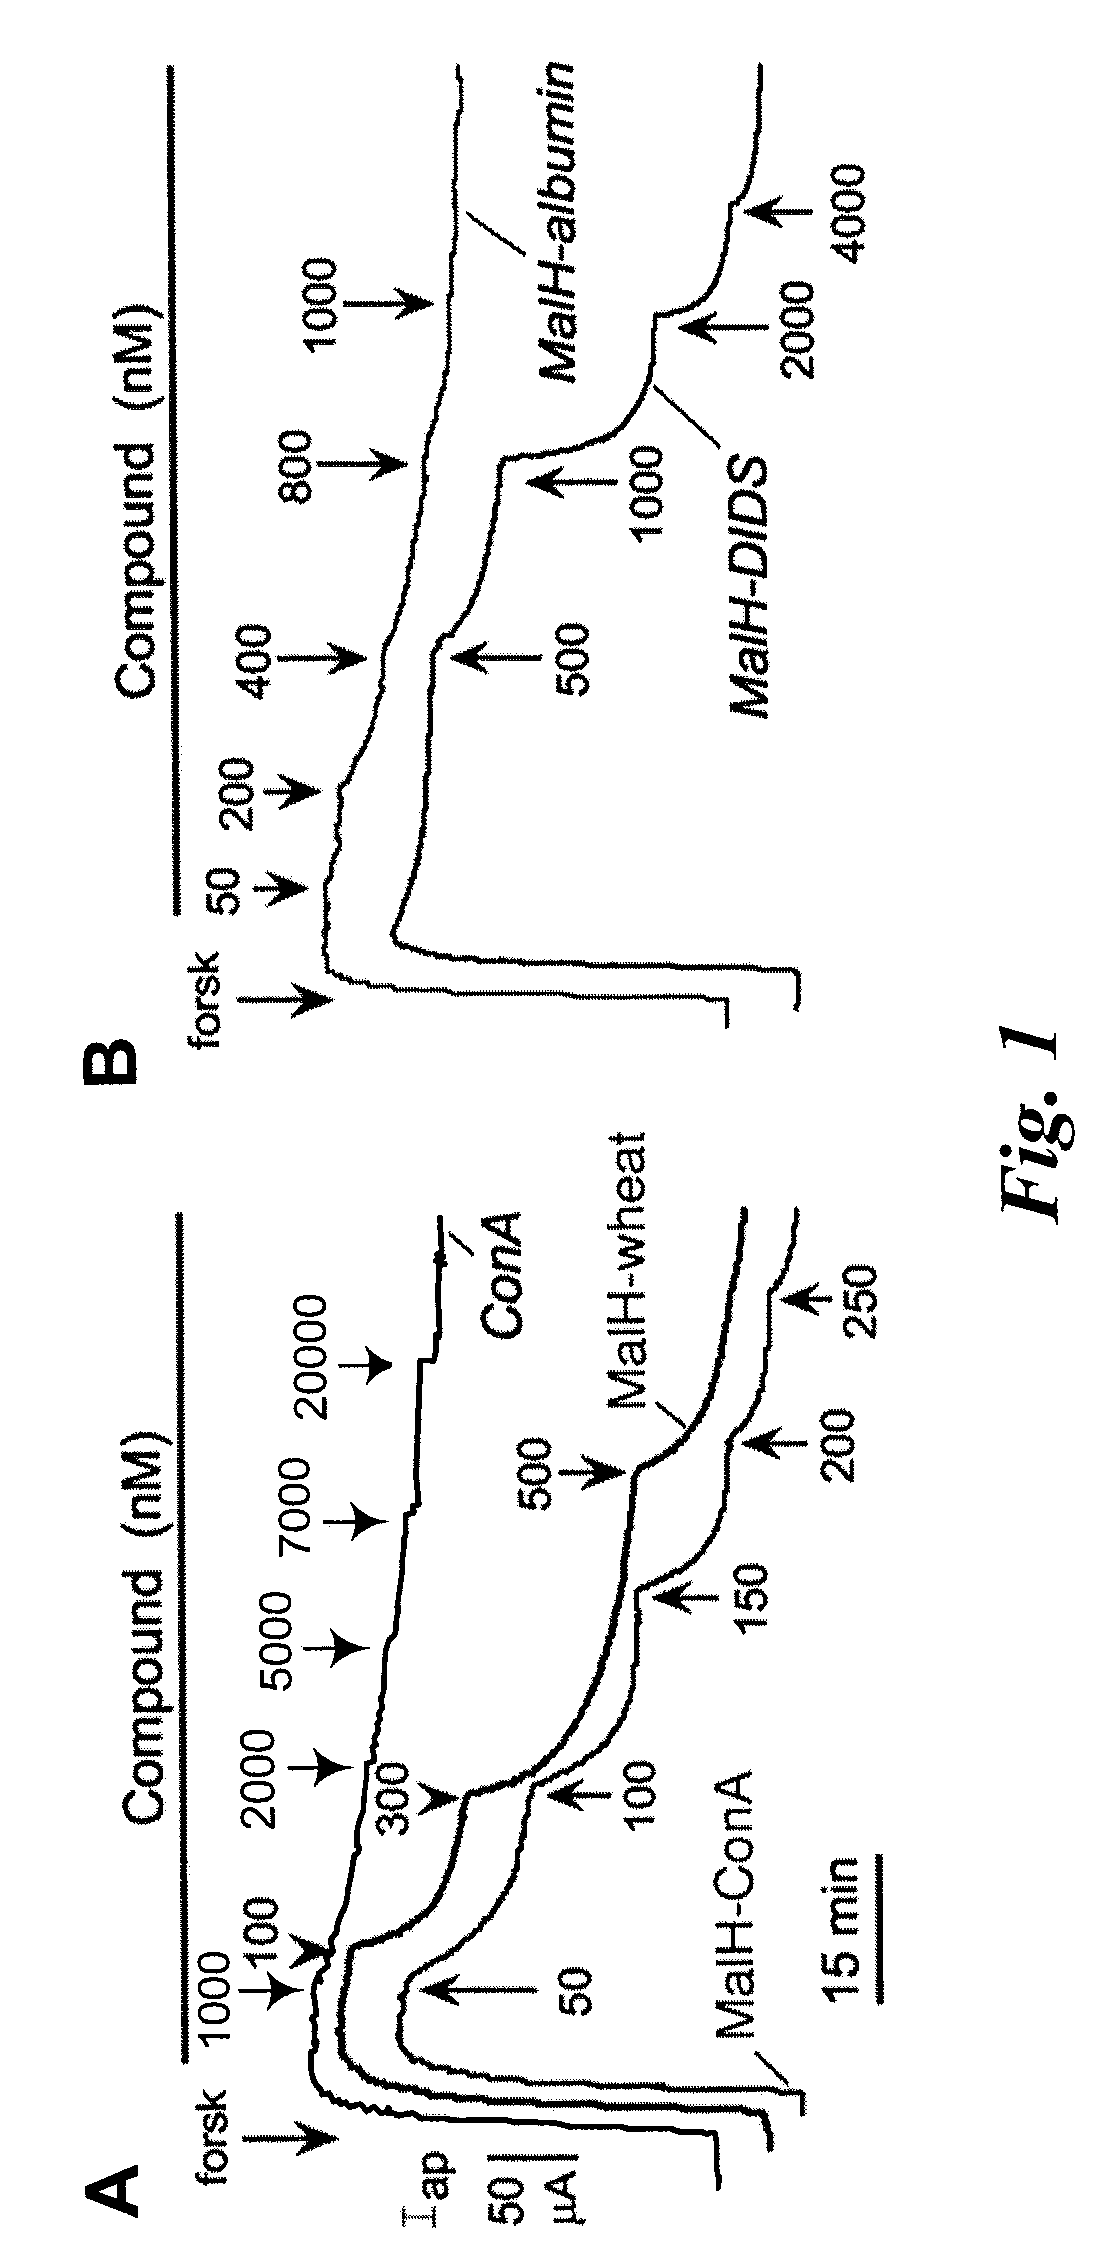 Macromolecular conjugates of cystic fibrosis transmembrane conductance regulator protein inhibitors and uses therefor